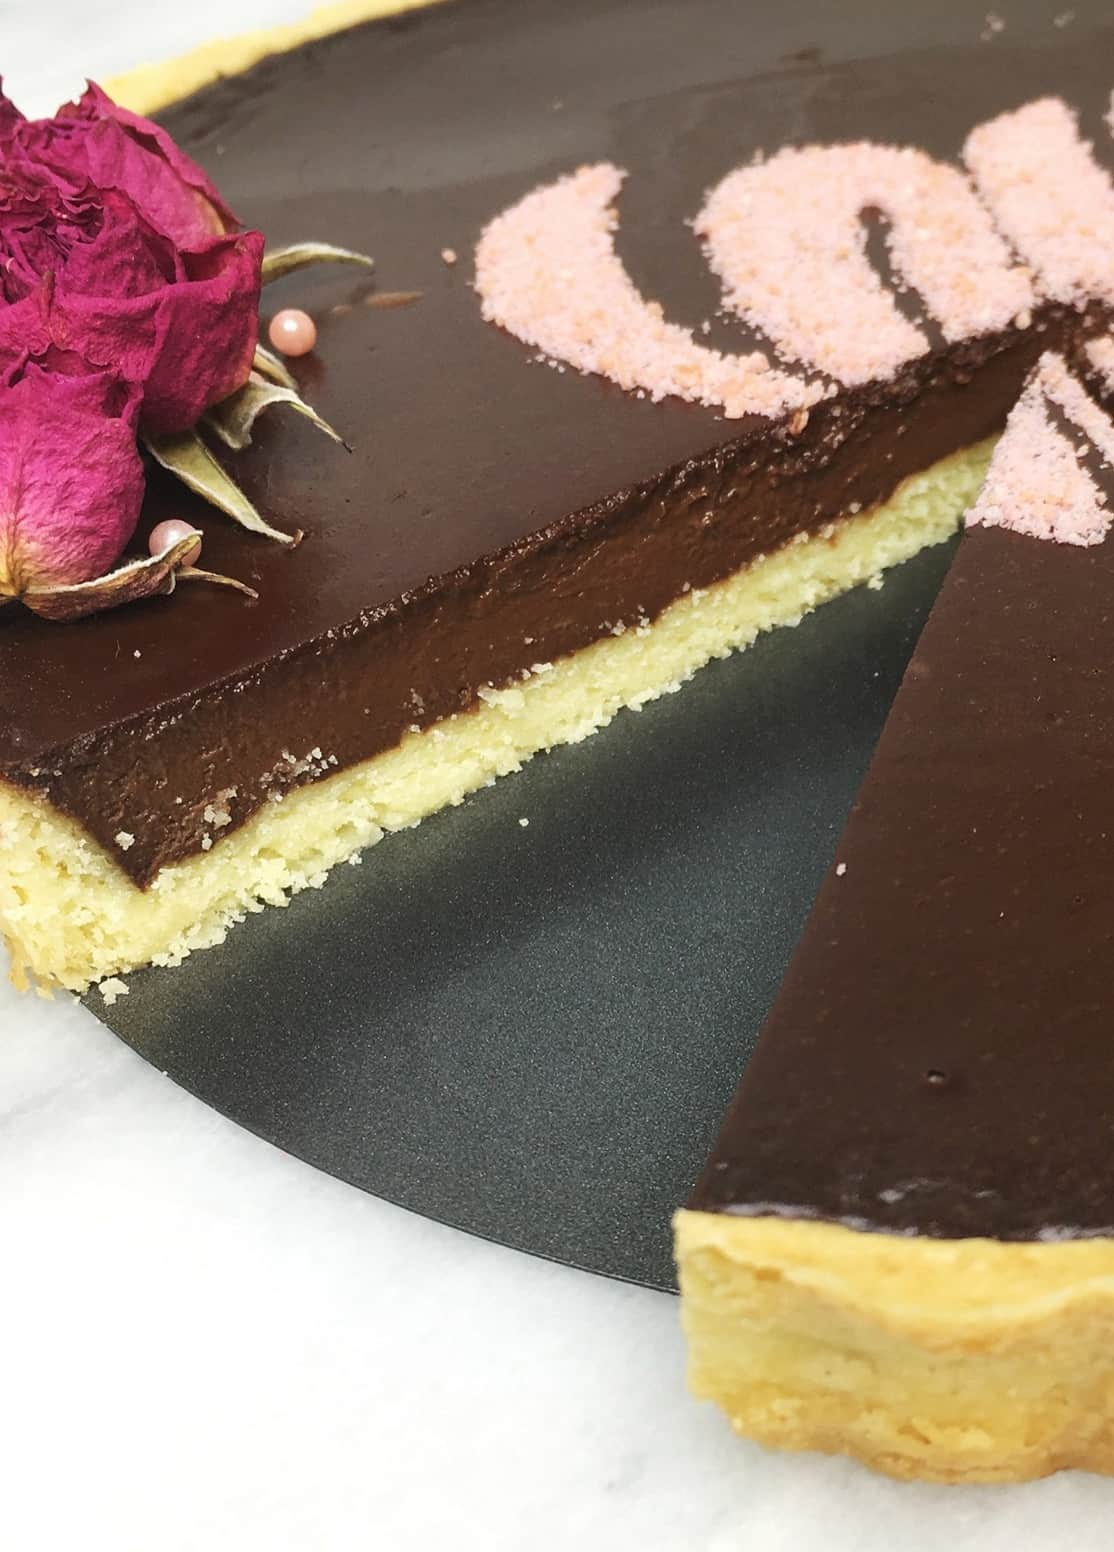 Chocolate ganache tart with the removed slice on a tart pan bottom